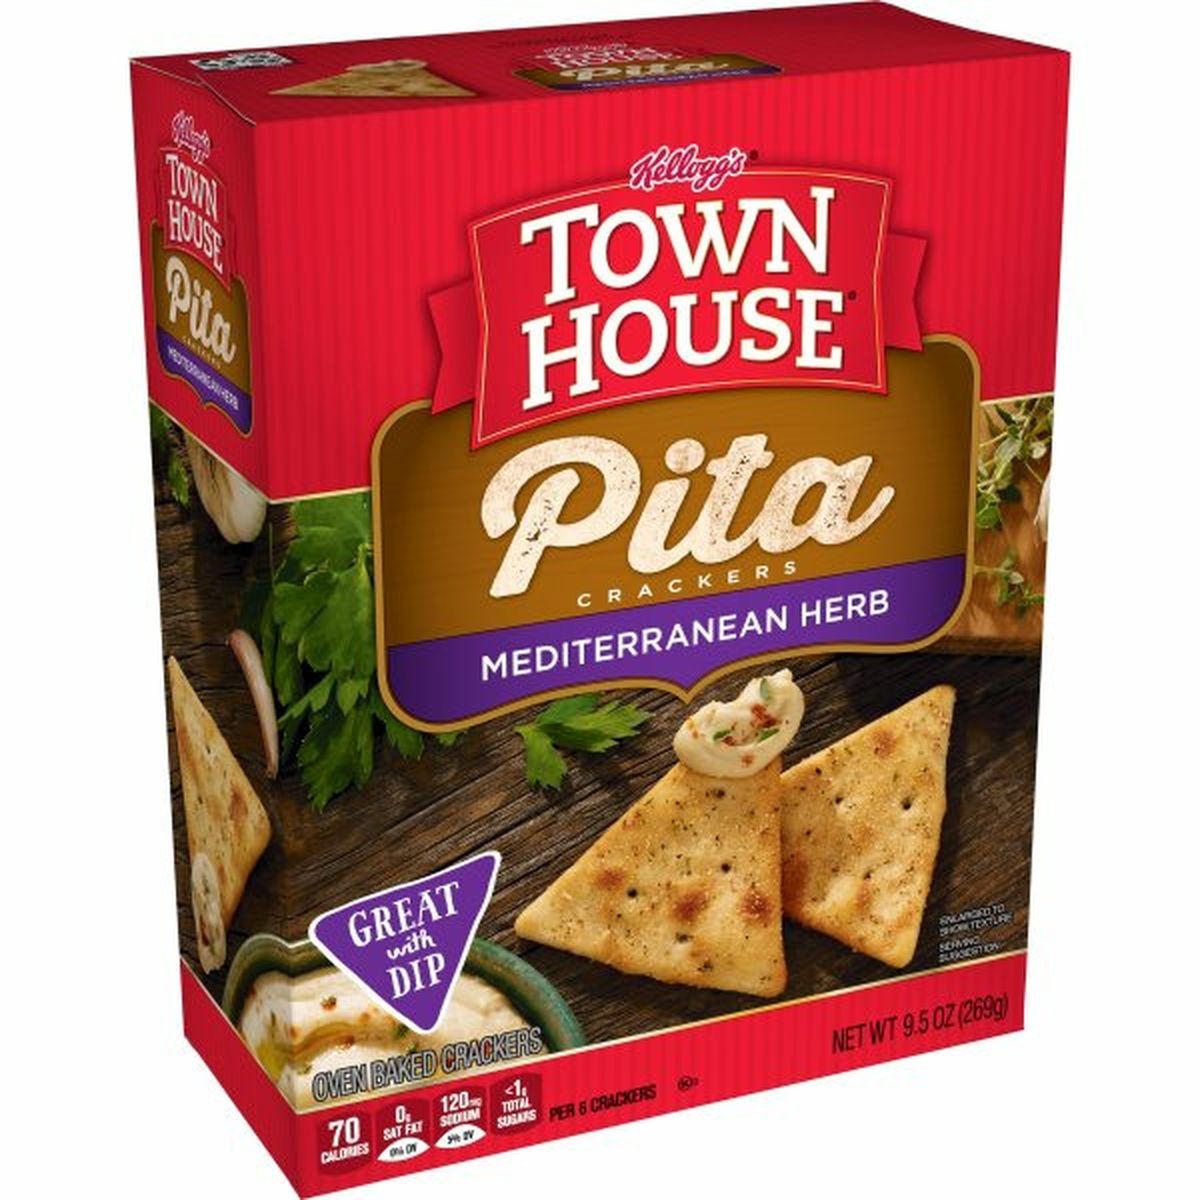 Calories in Kellogg's Town House Crackers Kellogg's Town House Pita Crackers, Mediterranean Herb, Ready To Dip Snacks, 9.5oz